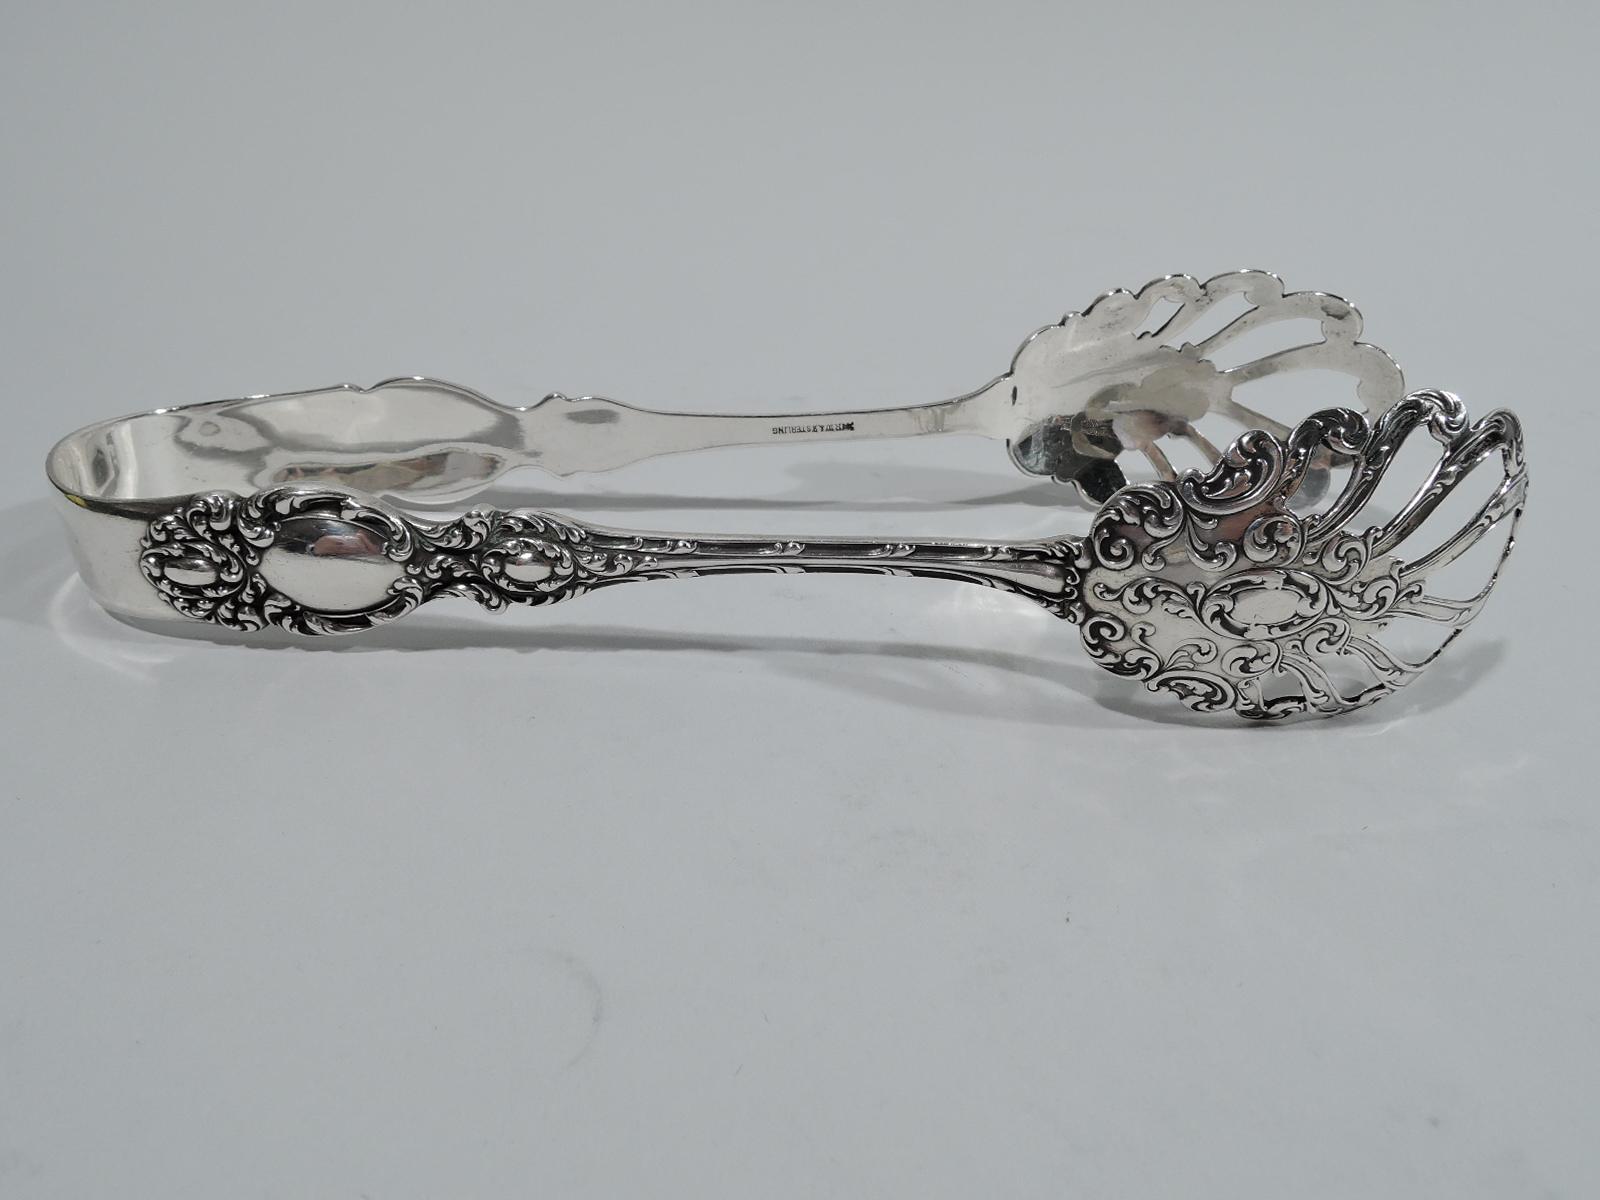 Lucerne sterling silver ice tongs. Made by R. Wallace & Sons in Wallingford, ca 1910. U-form with open and scrolled jaws. Terminals have dense scrollwork with large oval frame between two small ones. All frames vacant. A pretty piece in this late